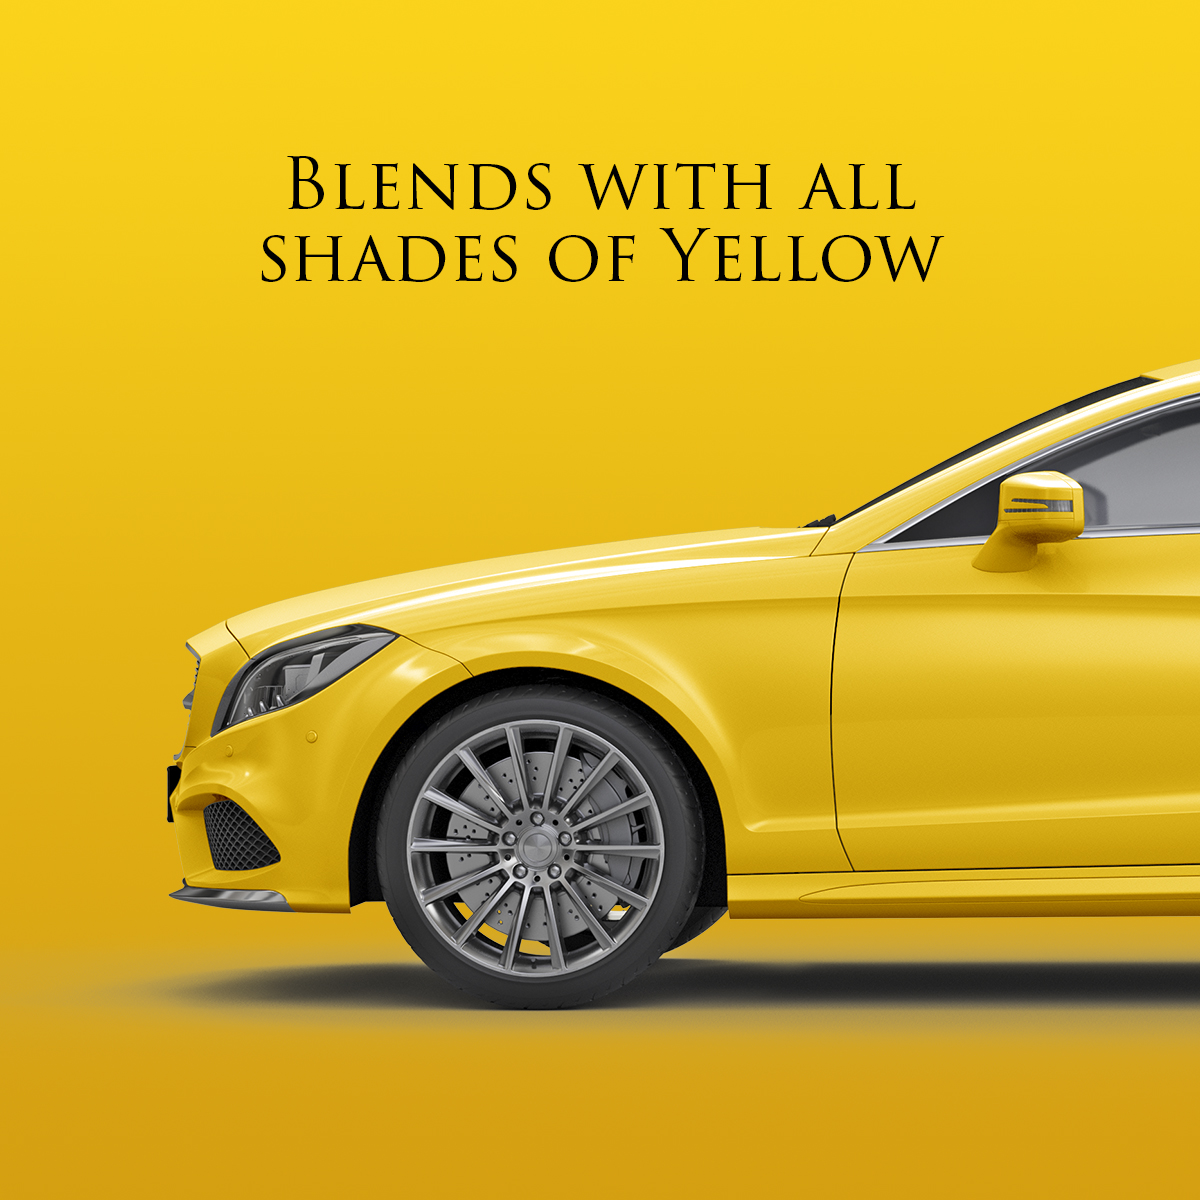 Blends with all shades of yellow